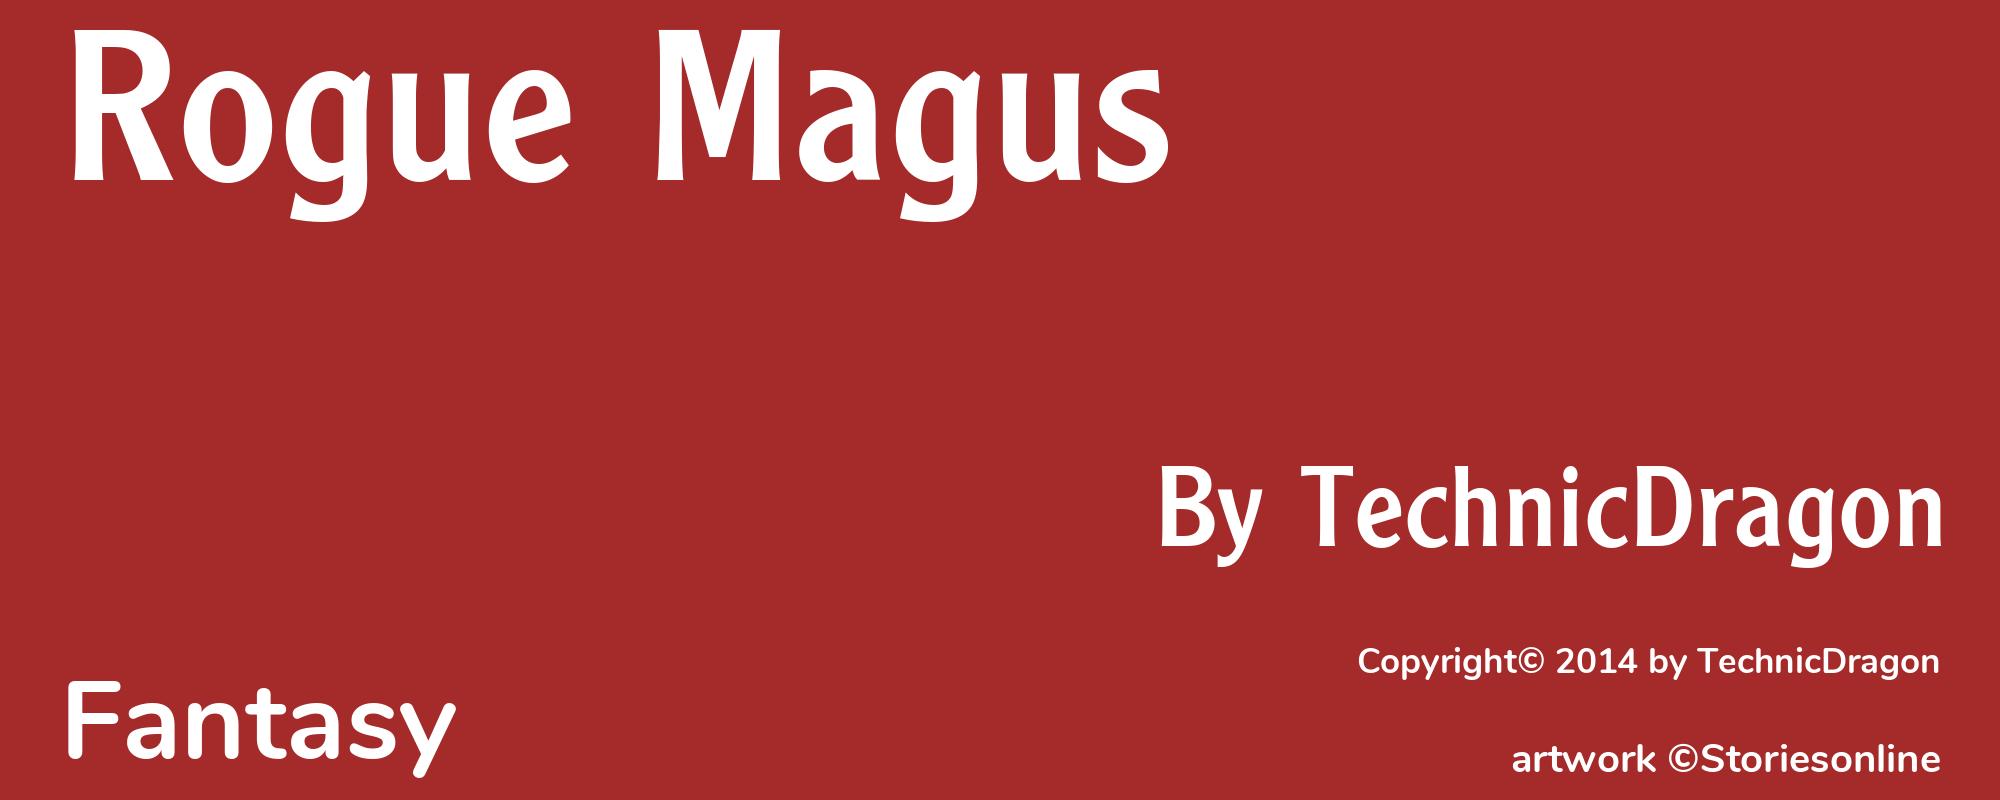 Rogue Magus - Cover